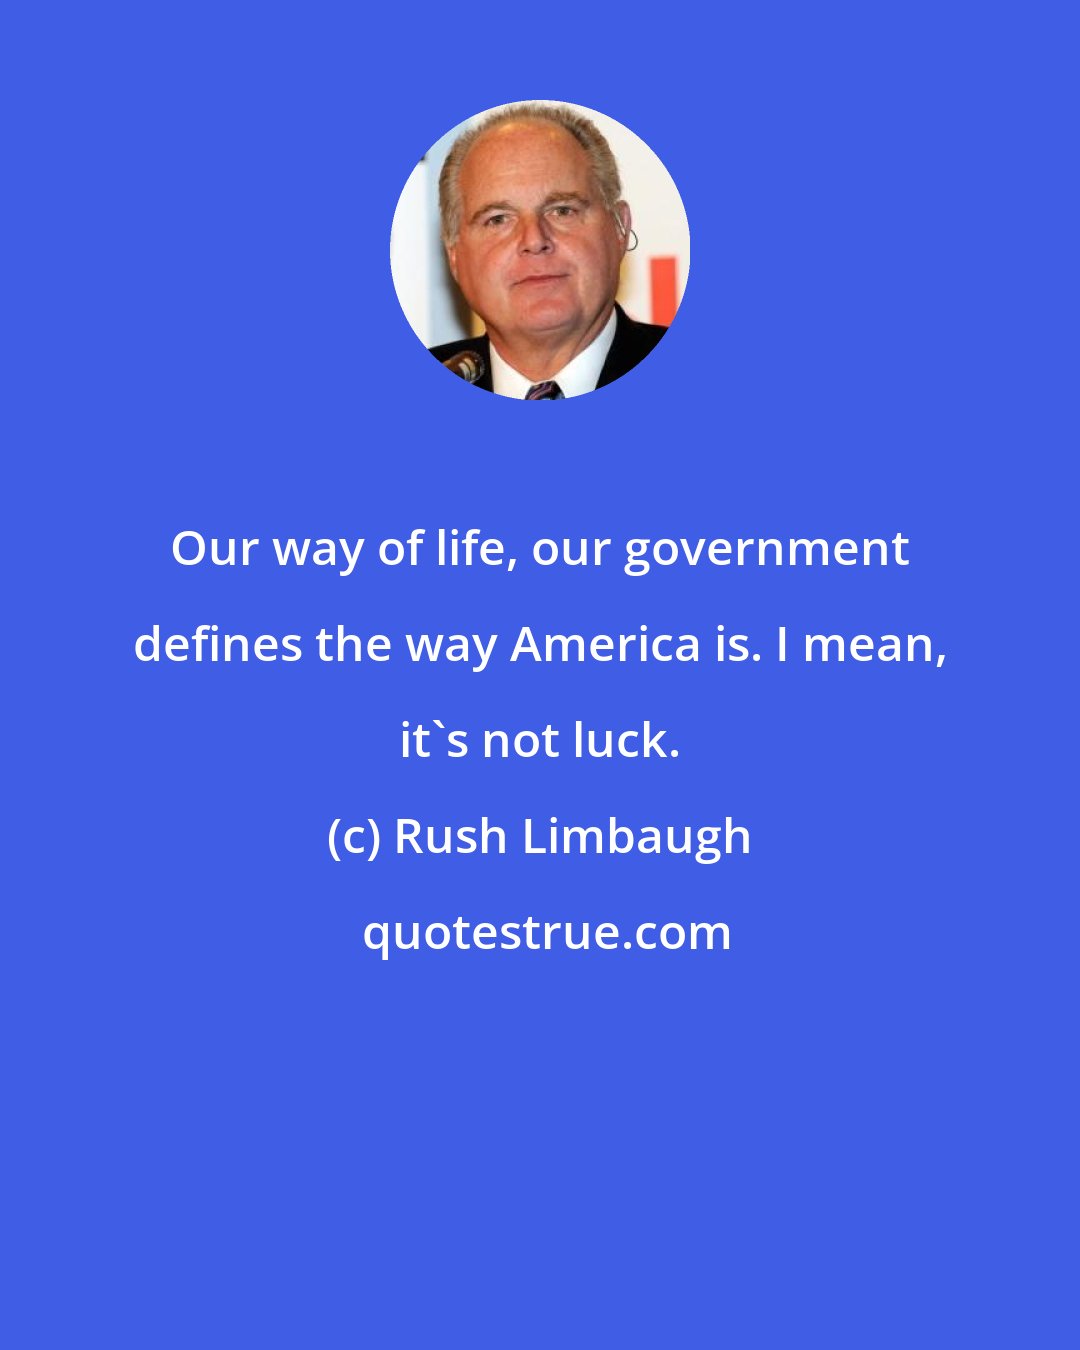 Rush Limbaugh: Our way of life, our government defines the way America is. I mean, it's not luck.